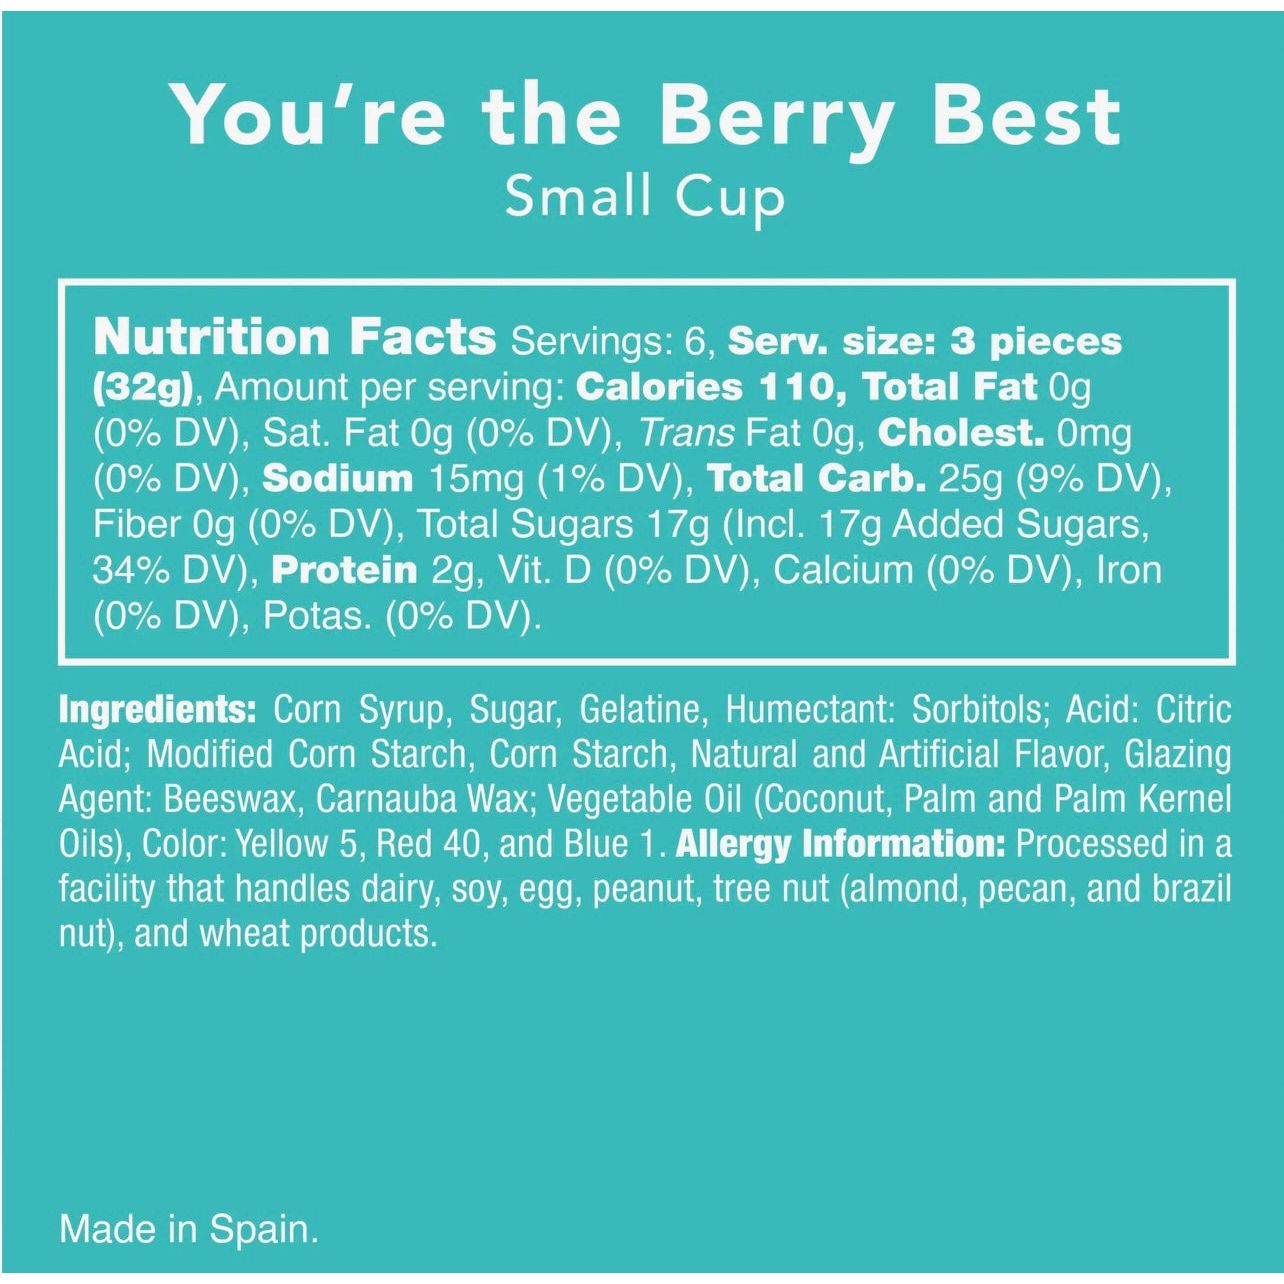 You’re the berry best